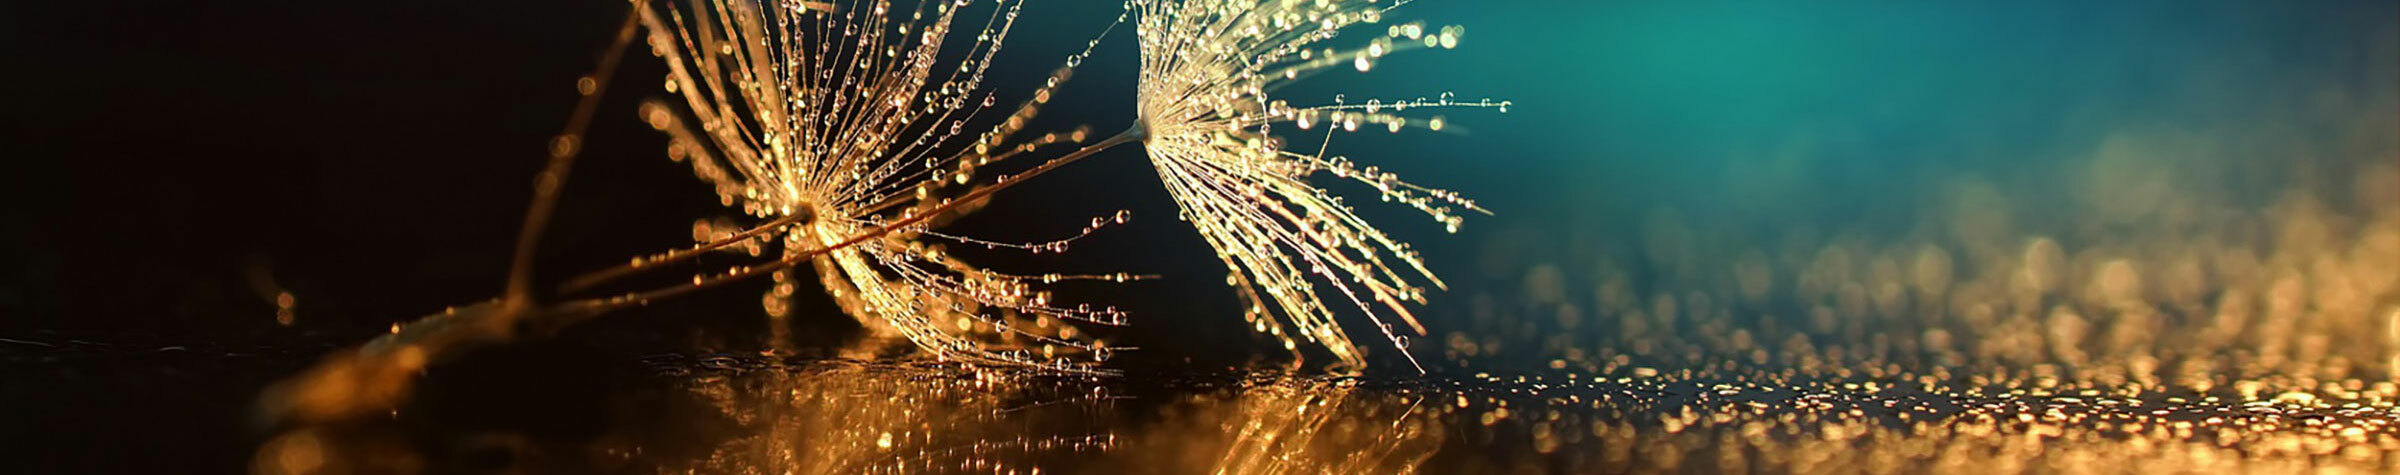 Microscopic view of seeds of dandelion mirror reflection